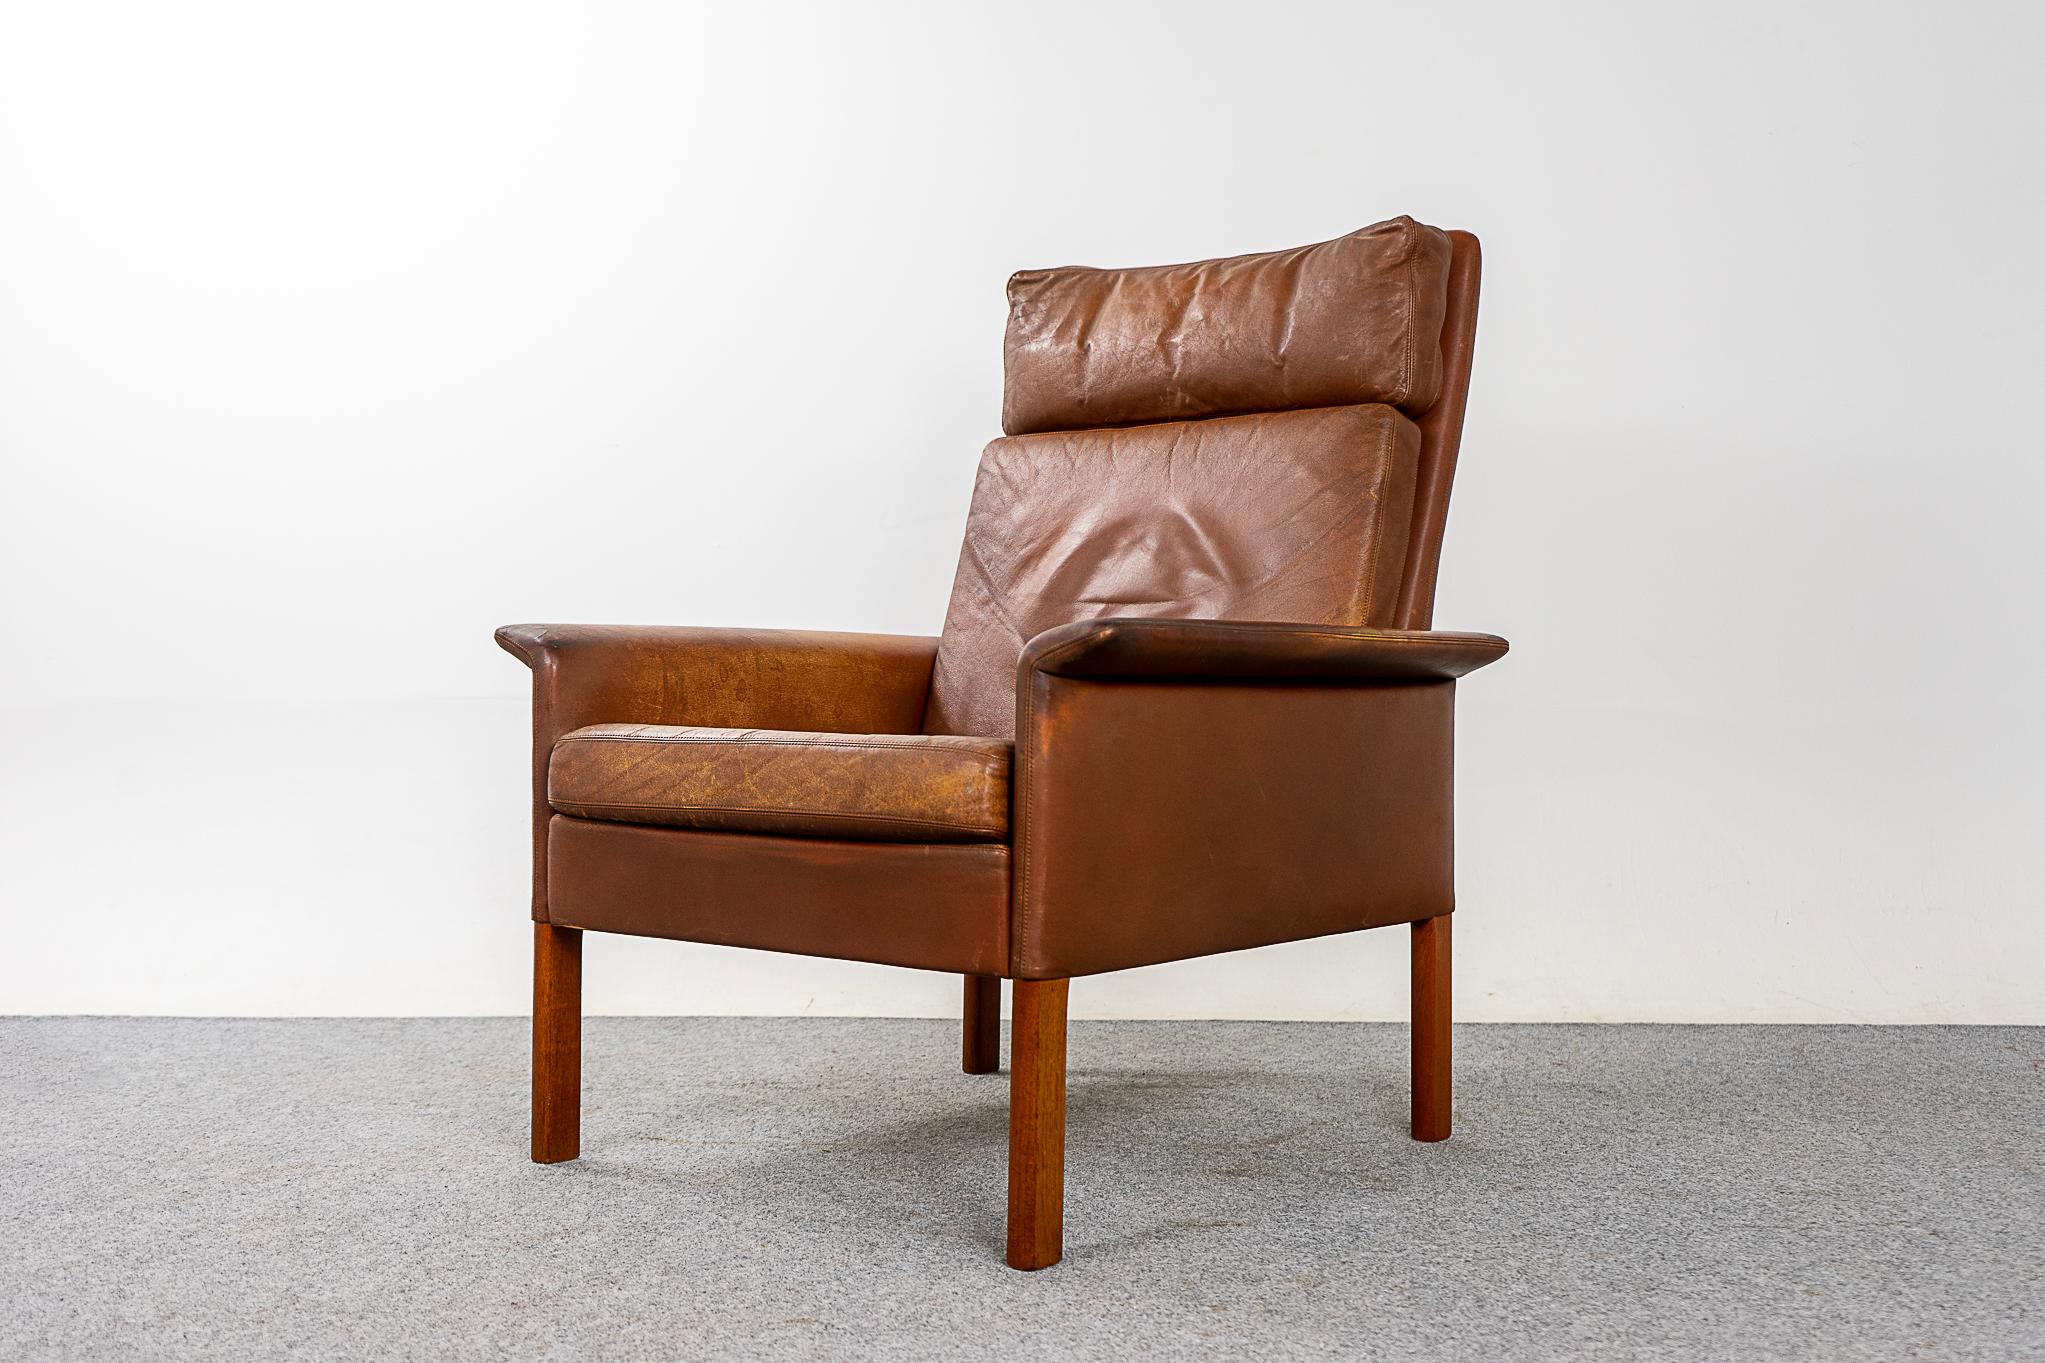 Leather Danish high back lounge chair, circa 1960's. Lovely lines, high back provides support for your neck. Highly patinaed leather. 

Unrestored item, some marks consistent with age.

Please inquire for international shipping rates.